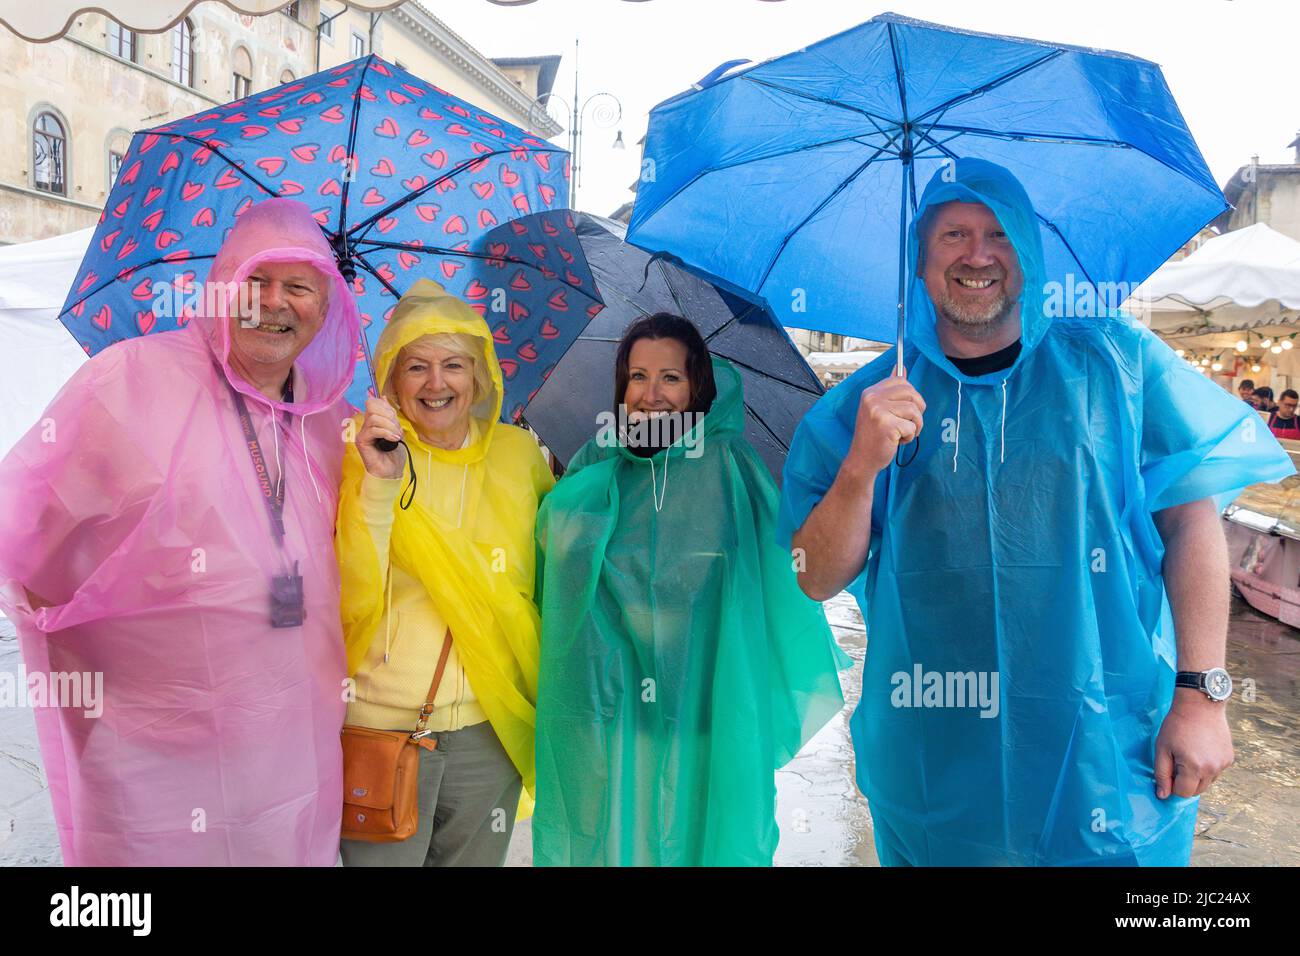 Family group in rain with colourful raincoats and umbrellas, Piazza di Santa Croce, Florence (Firenze), Tuscany Region, Italy Stock Photo